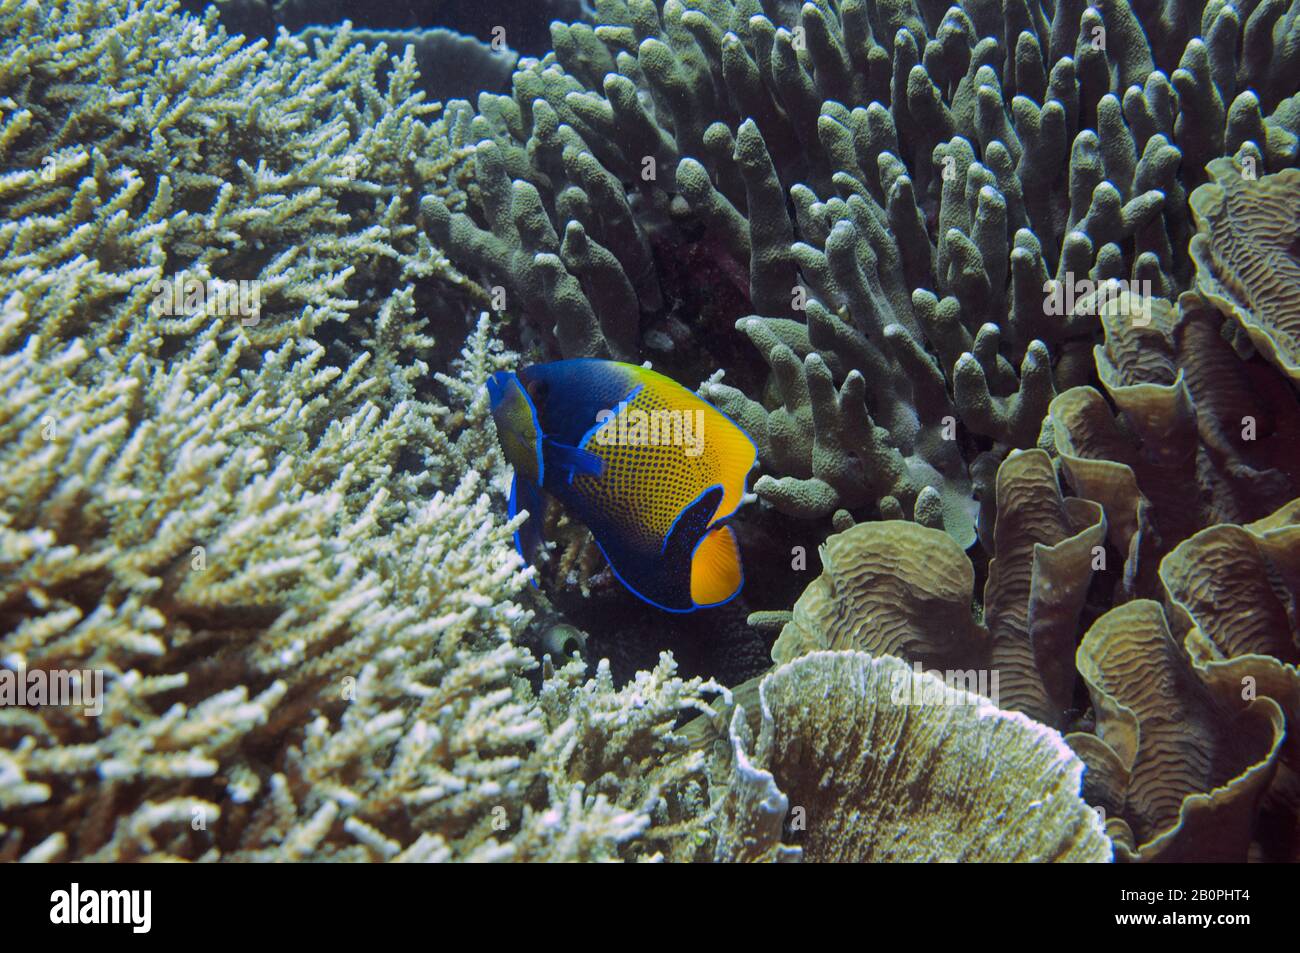 Blue-girdled angelfish, Pomacanthus navarchus, between four species of coral, two Acropora sp., Echinopora sp. and Turbinaria sp., Komodo National Par Stock Photo